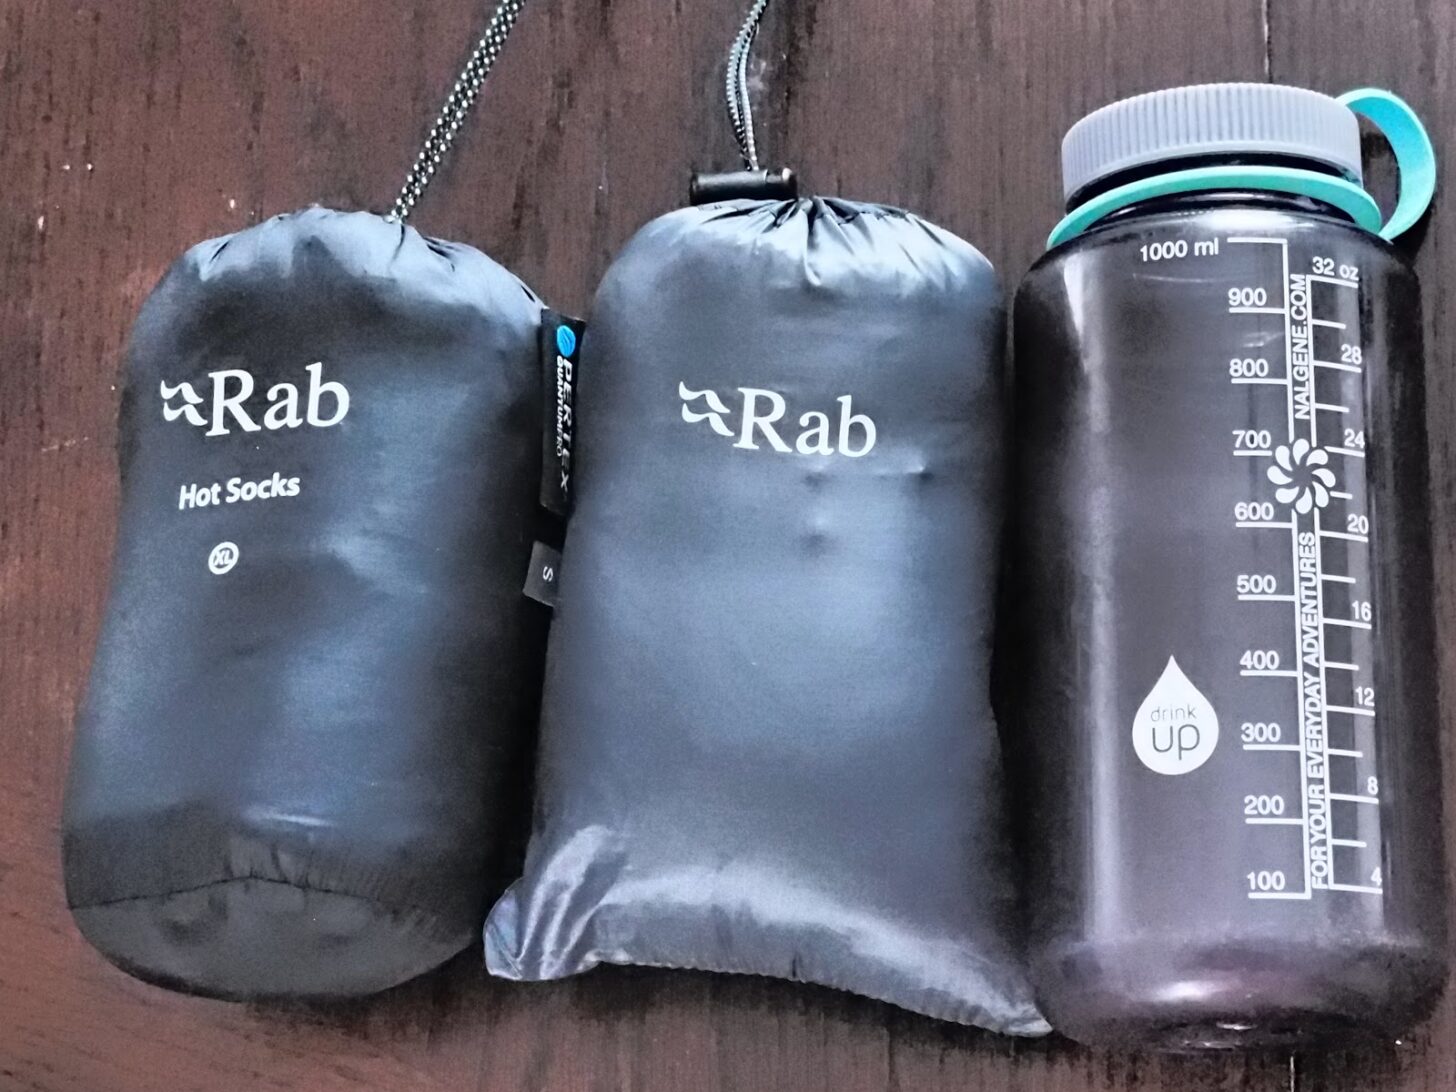 Both products in stuff sacks next to a water bottle for comparison